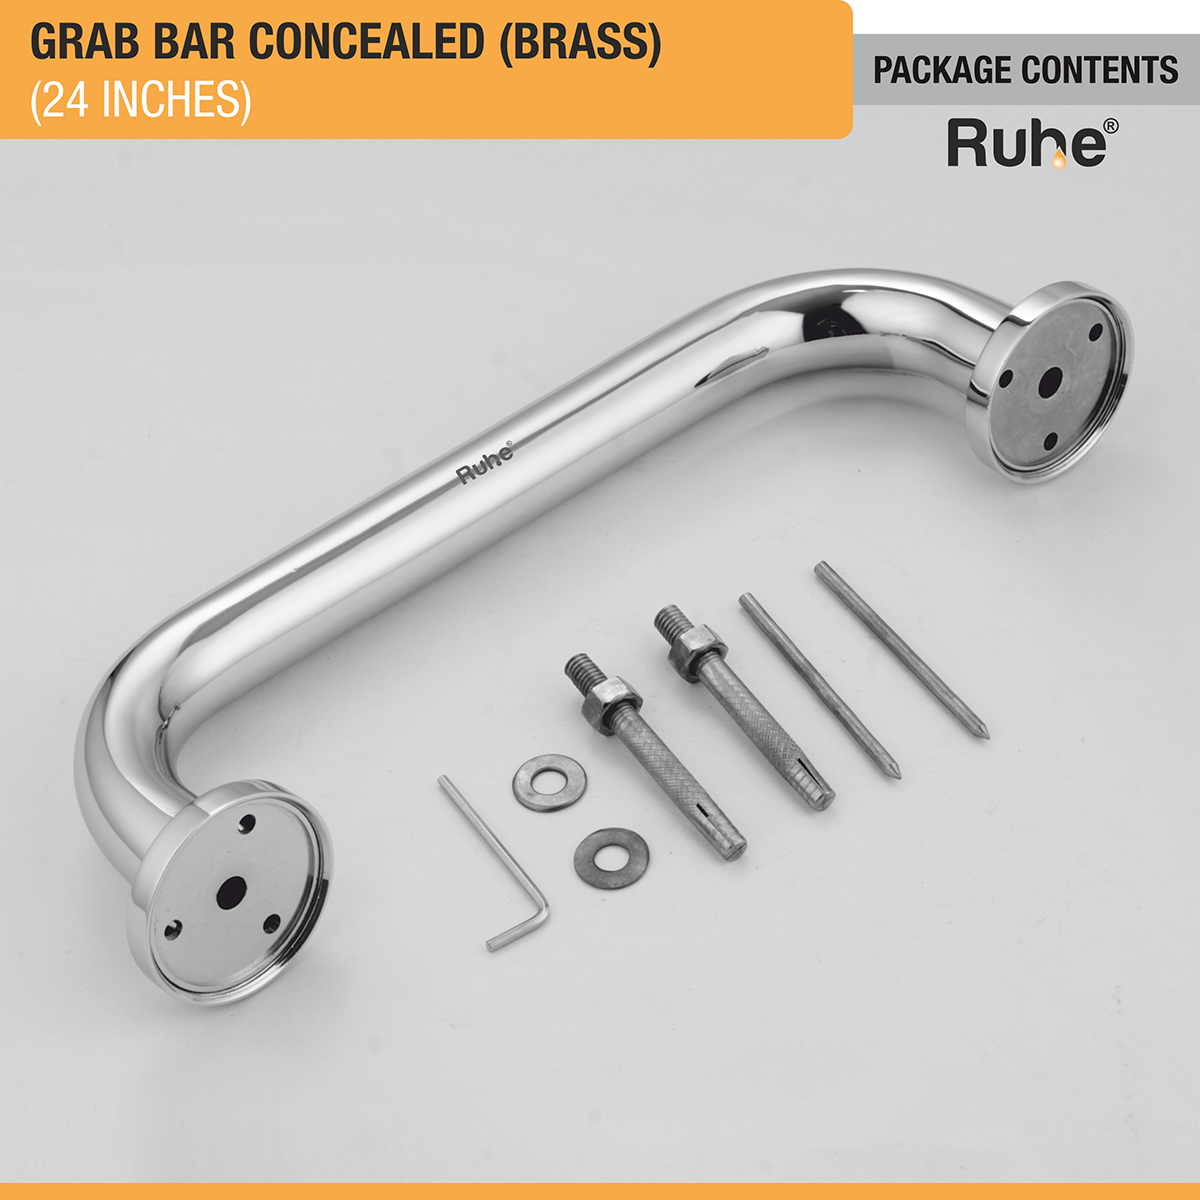 Brass Grab Bar Concealed (24 inches) package content